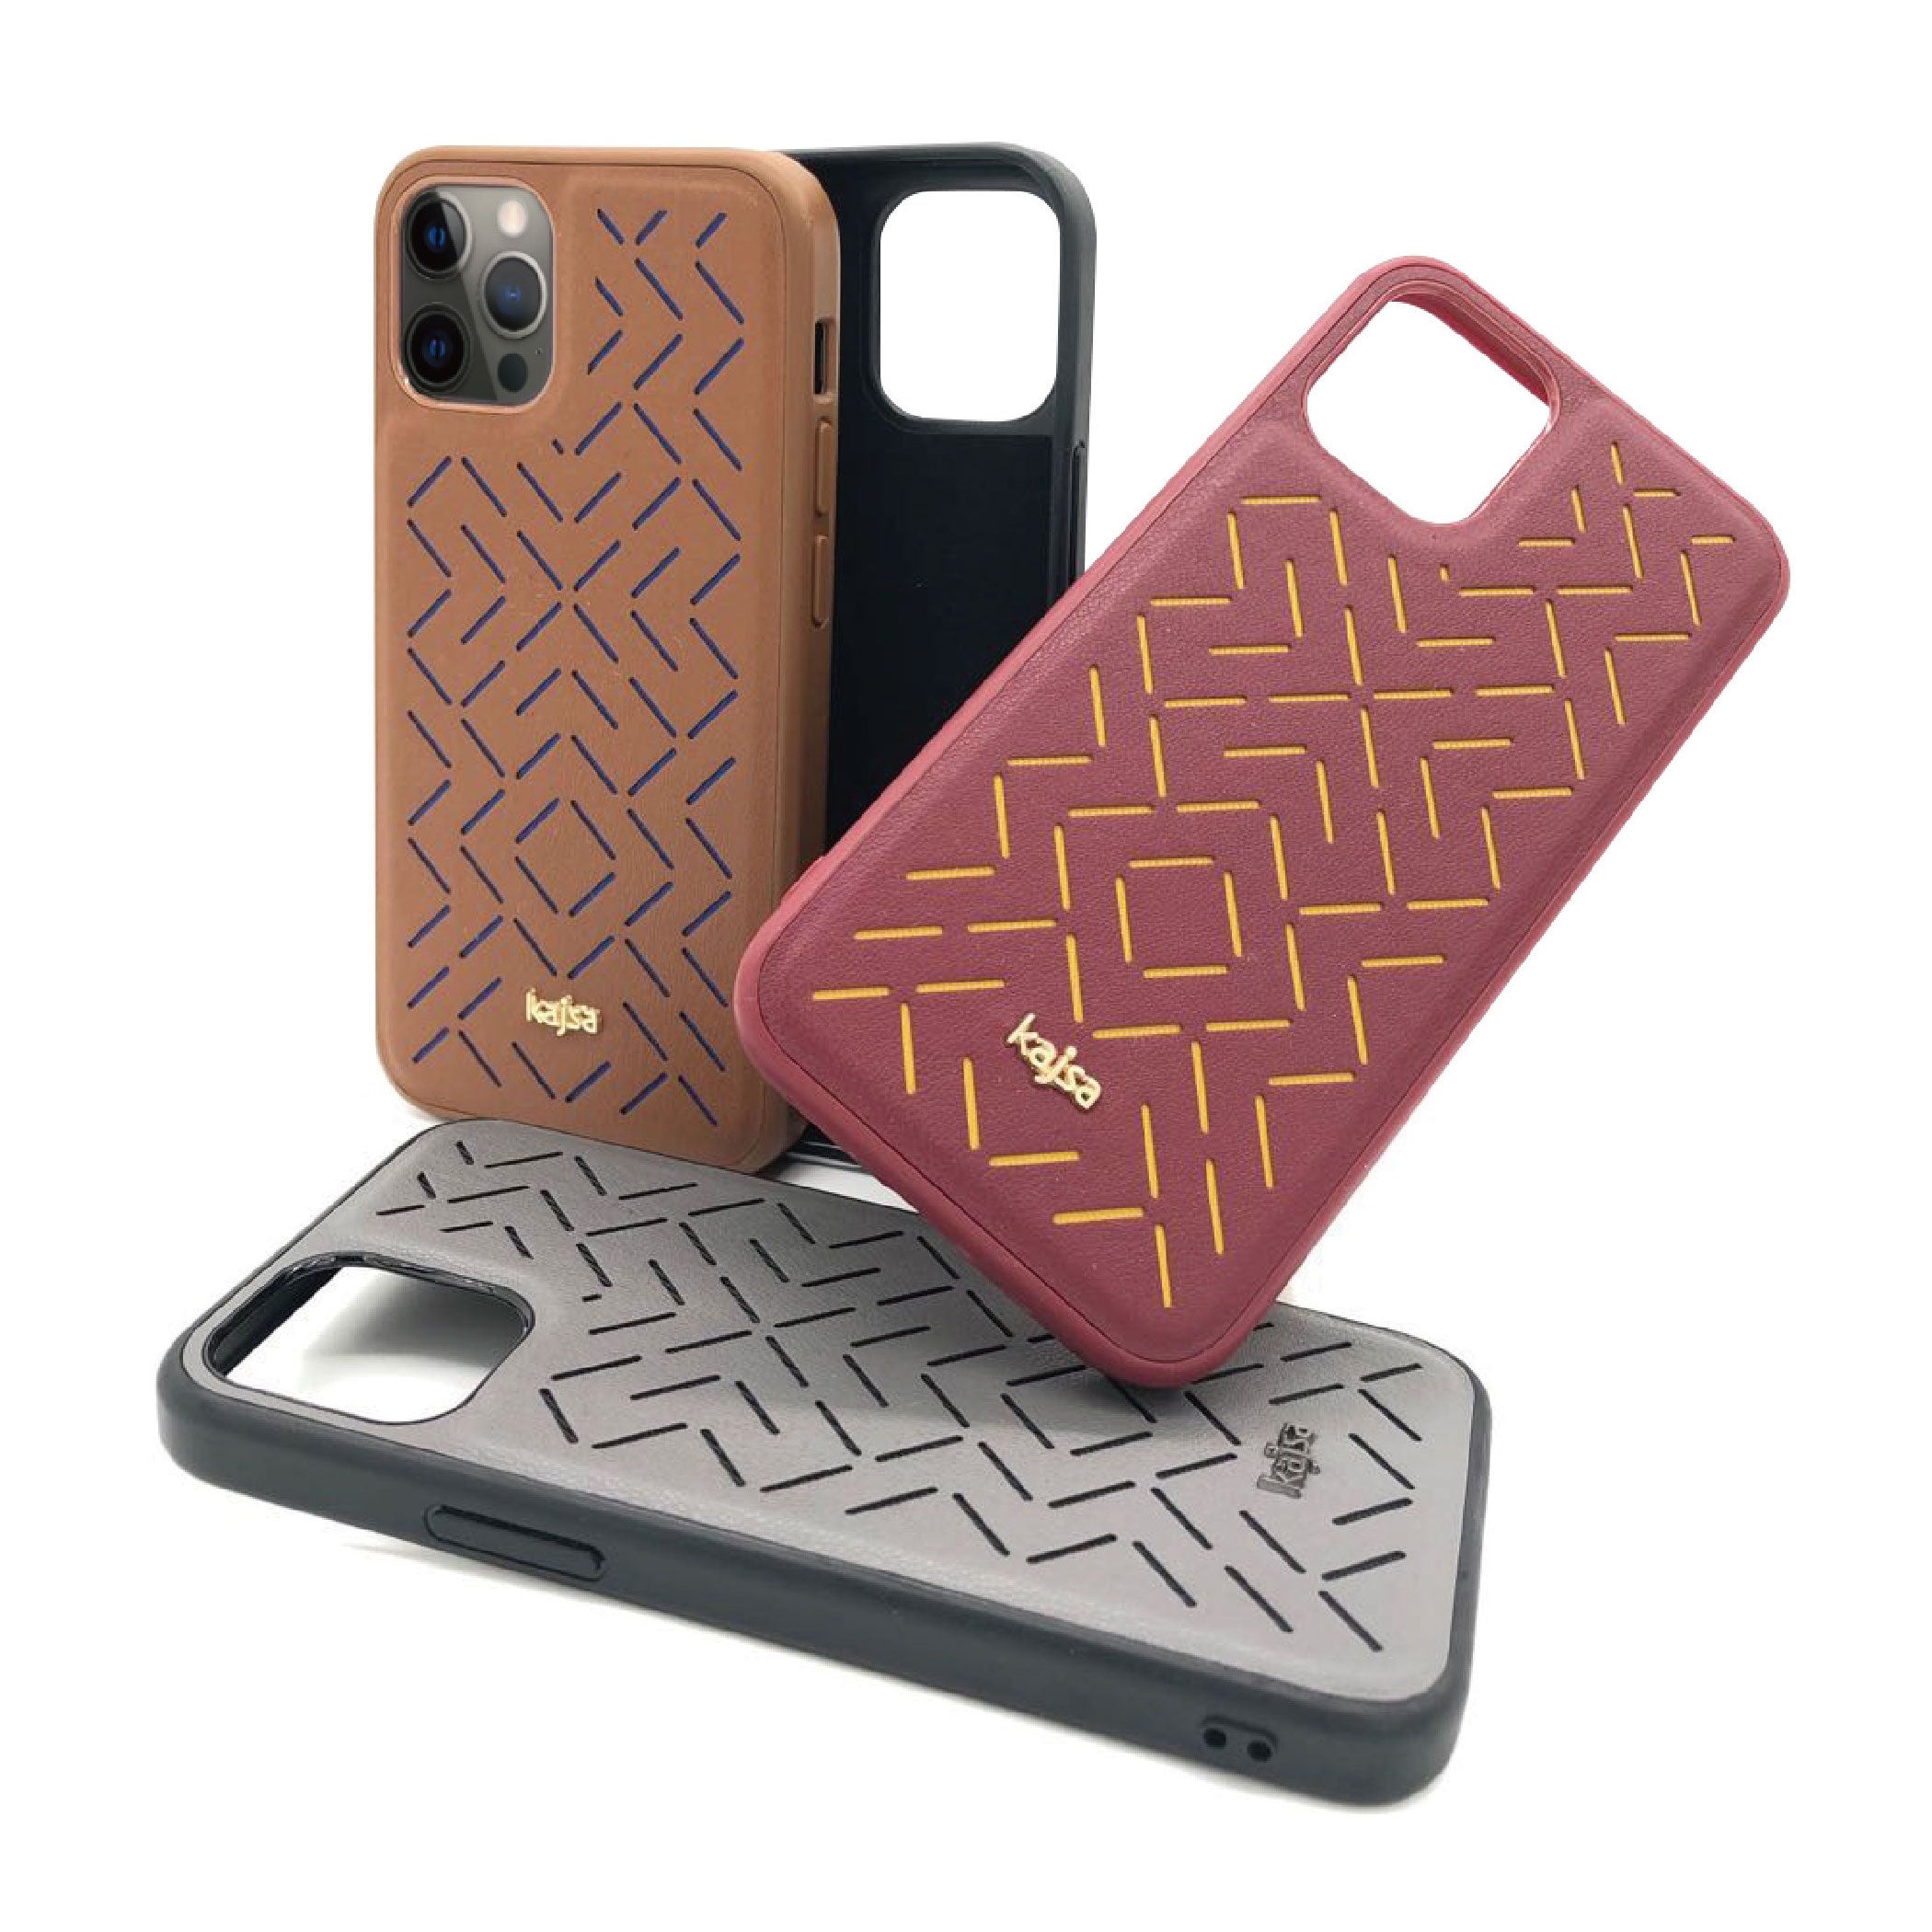 Splendid Series Collection - Square Back Case for iPhone 12-Phone Case- phone case - phone cases- phone cover- iphone cover- iphone case- iphone cases- leather case- leather cases- DIYCASE - custom case - leather cover - hand strap case - croco pattern case - snake pattern case - carbon fiber phone case - phone case brand - unique phone case - high quality - phone case brand - protective case - buy phone case hong kong - online buy phone case - iphone‎手機殼 - 客製化手機殼 - samsung ‎手機殼 - 香港手機殼 - 買電話殼